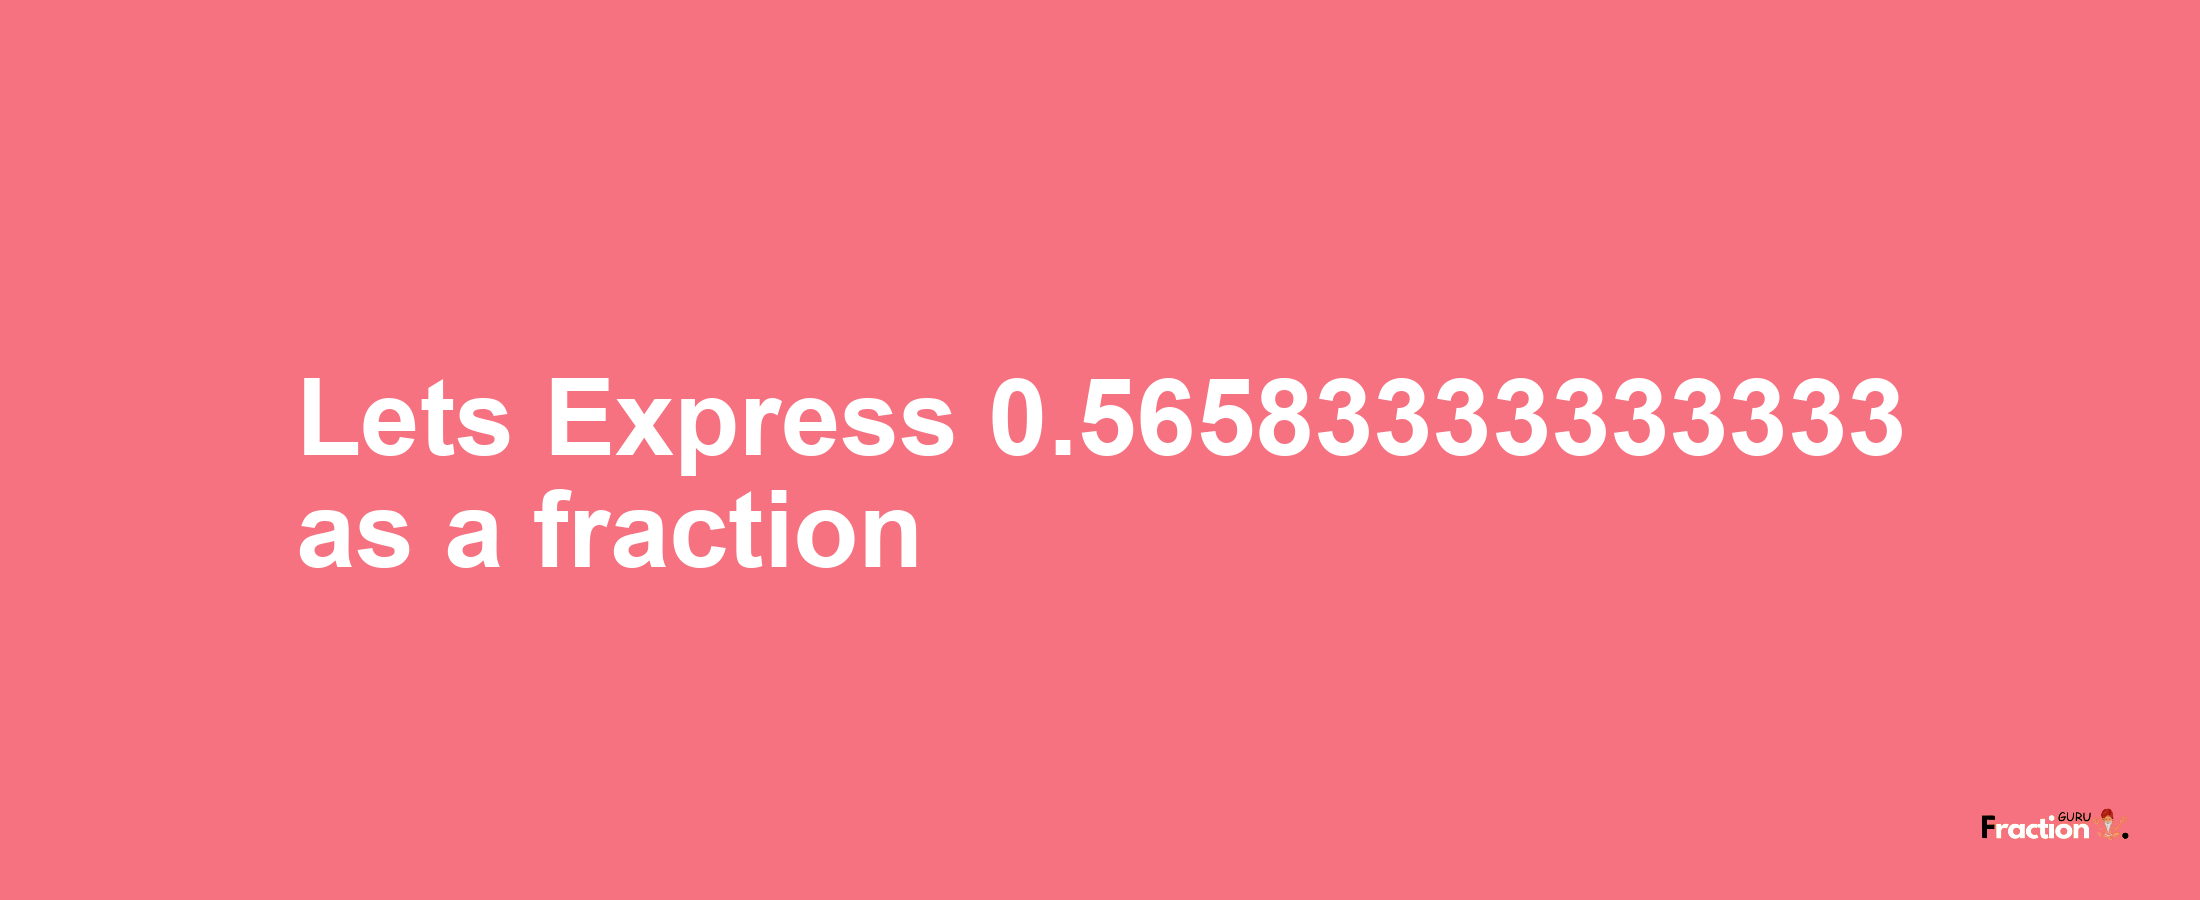 Lets Express 0.56583333333333 as afraction